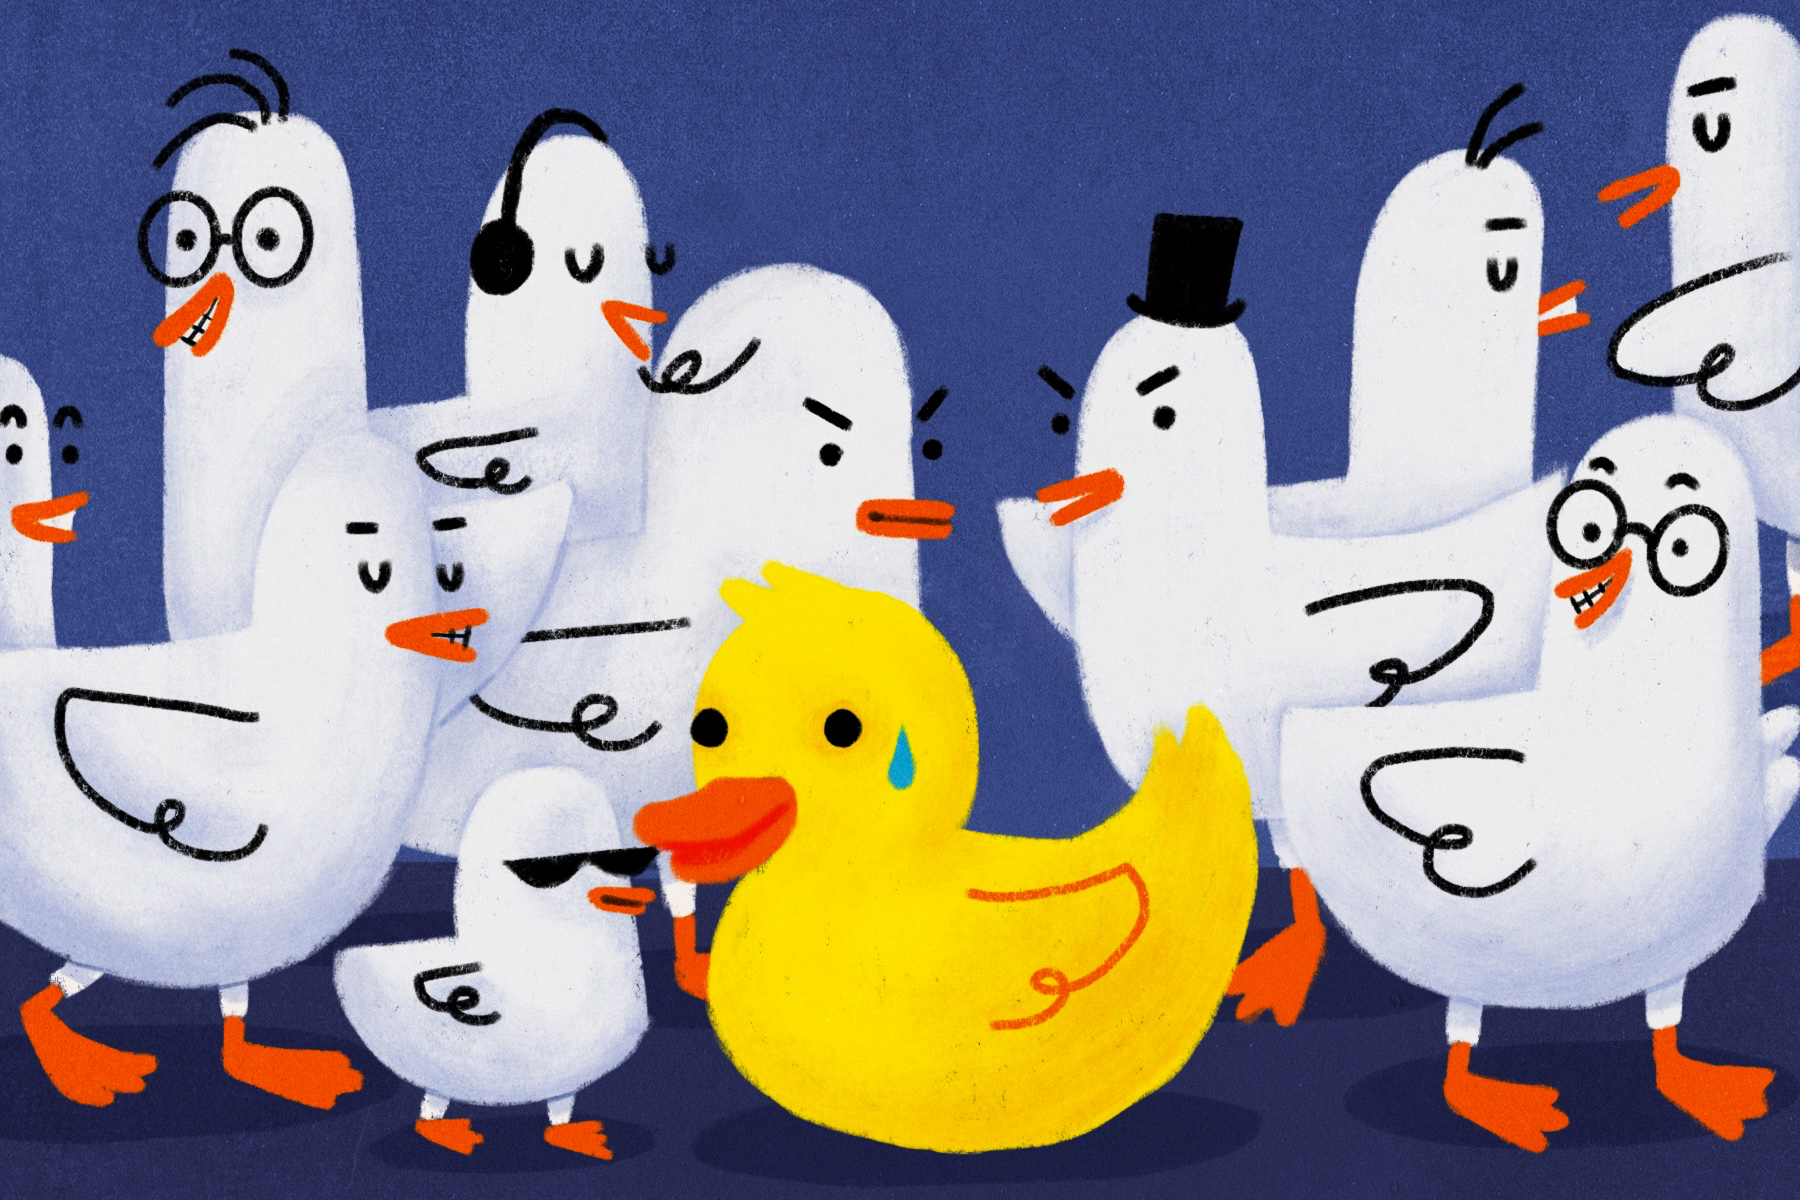 An illustration of a rubber duck surrounded by real ducks